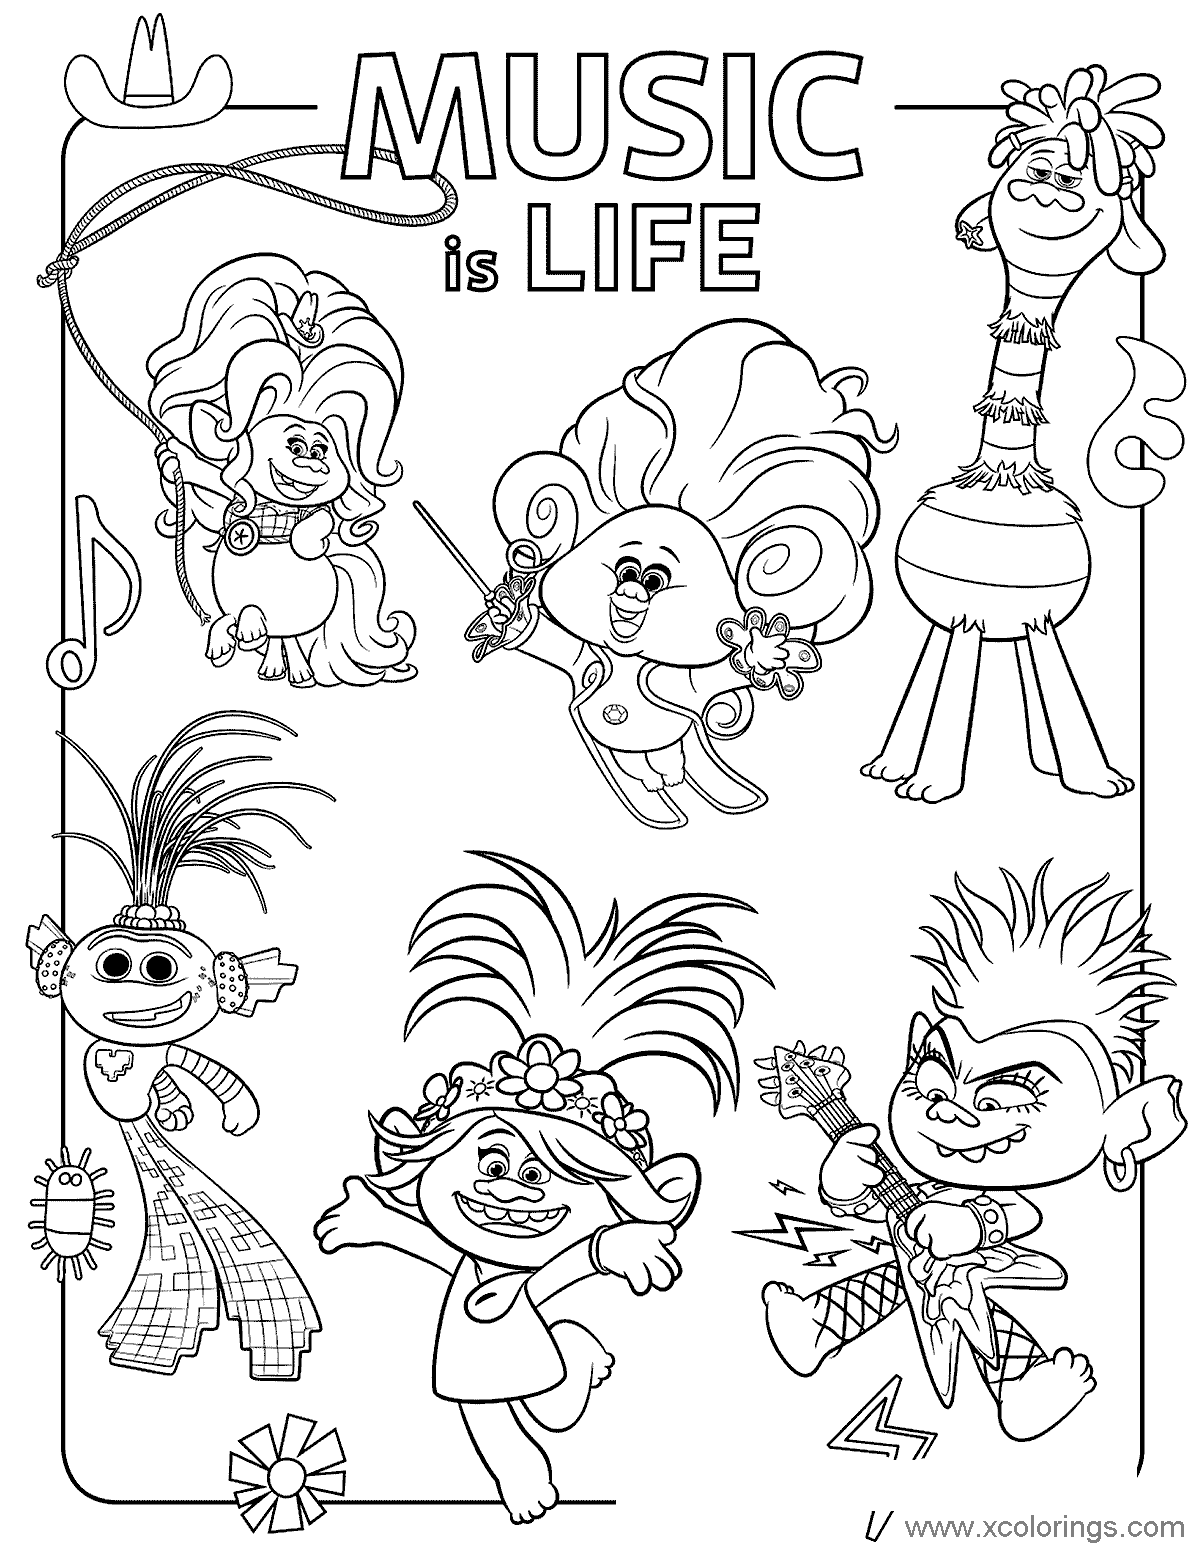 Free Trolls World Tour Music is Life Coloring Pages printable